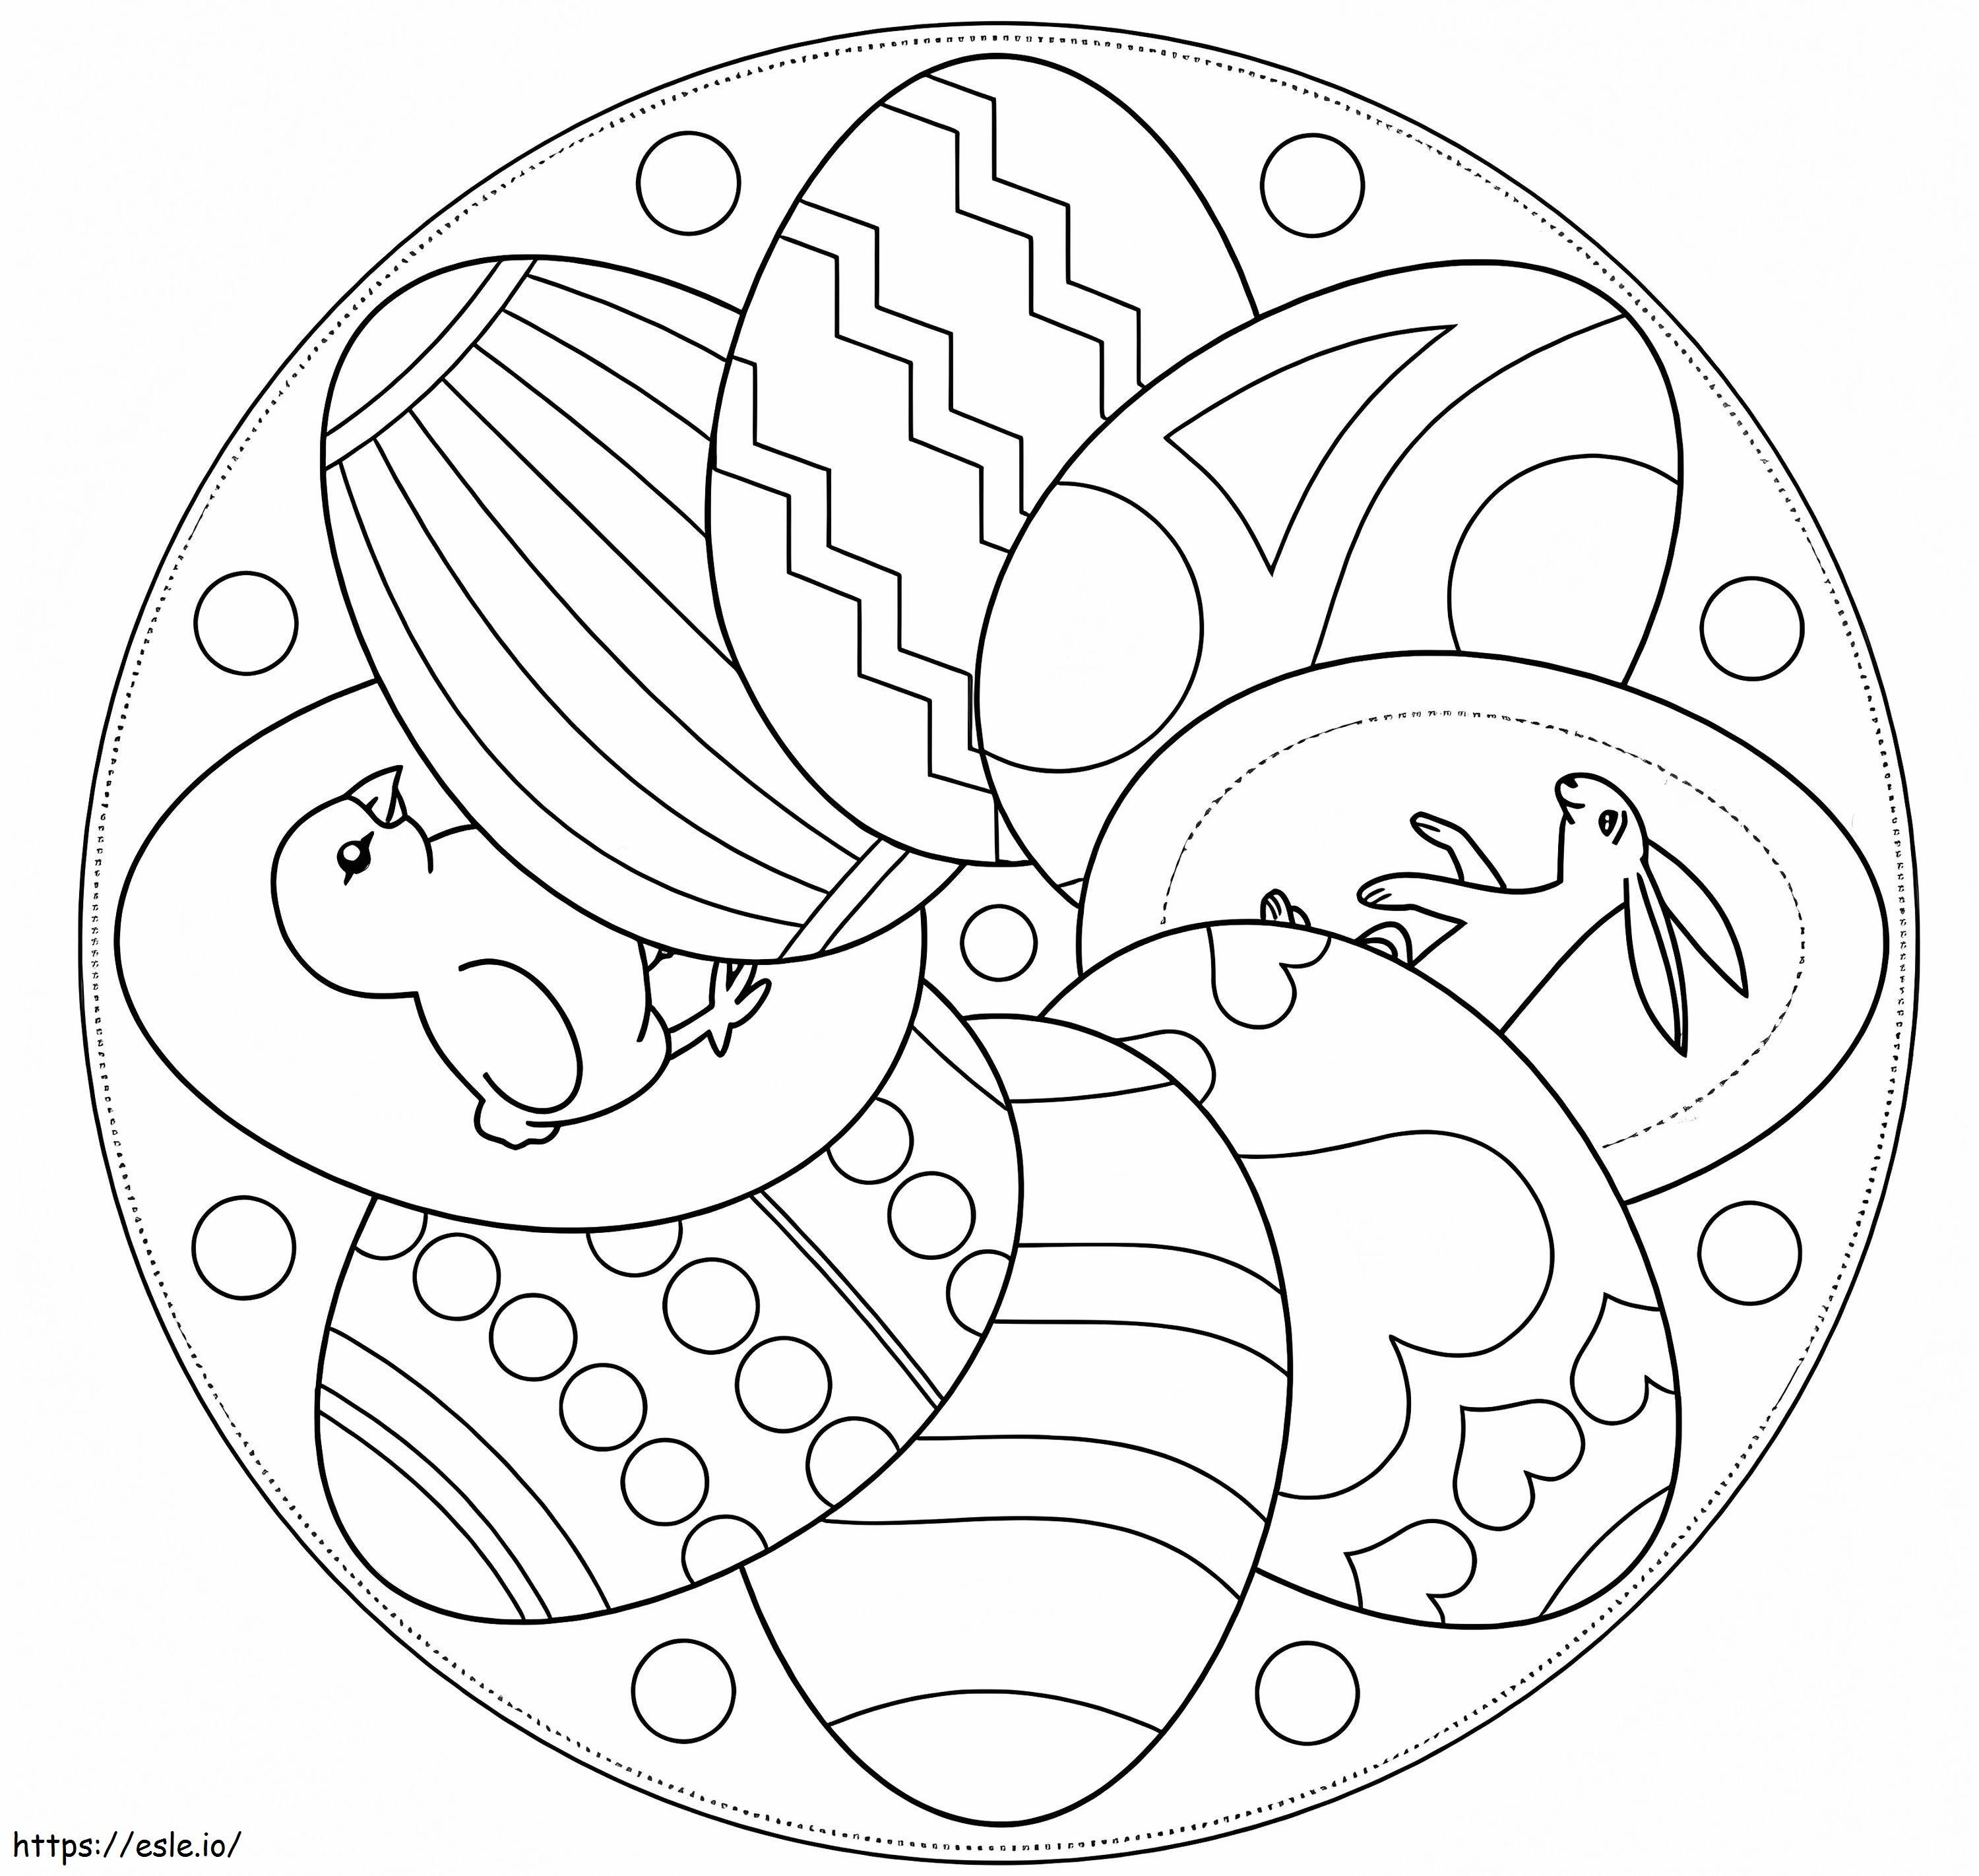 Easter Mandala With Eggs coloring page